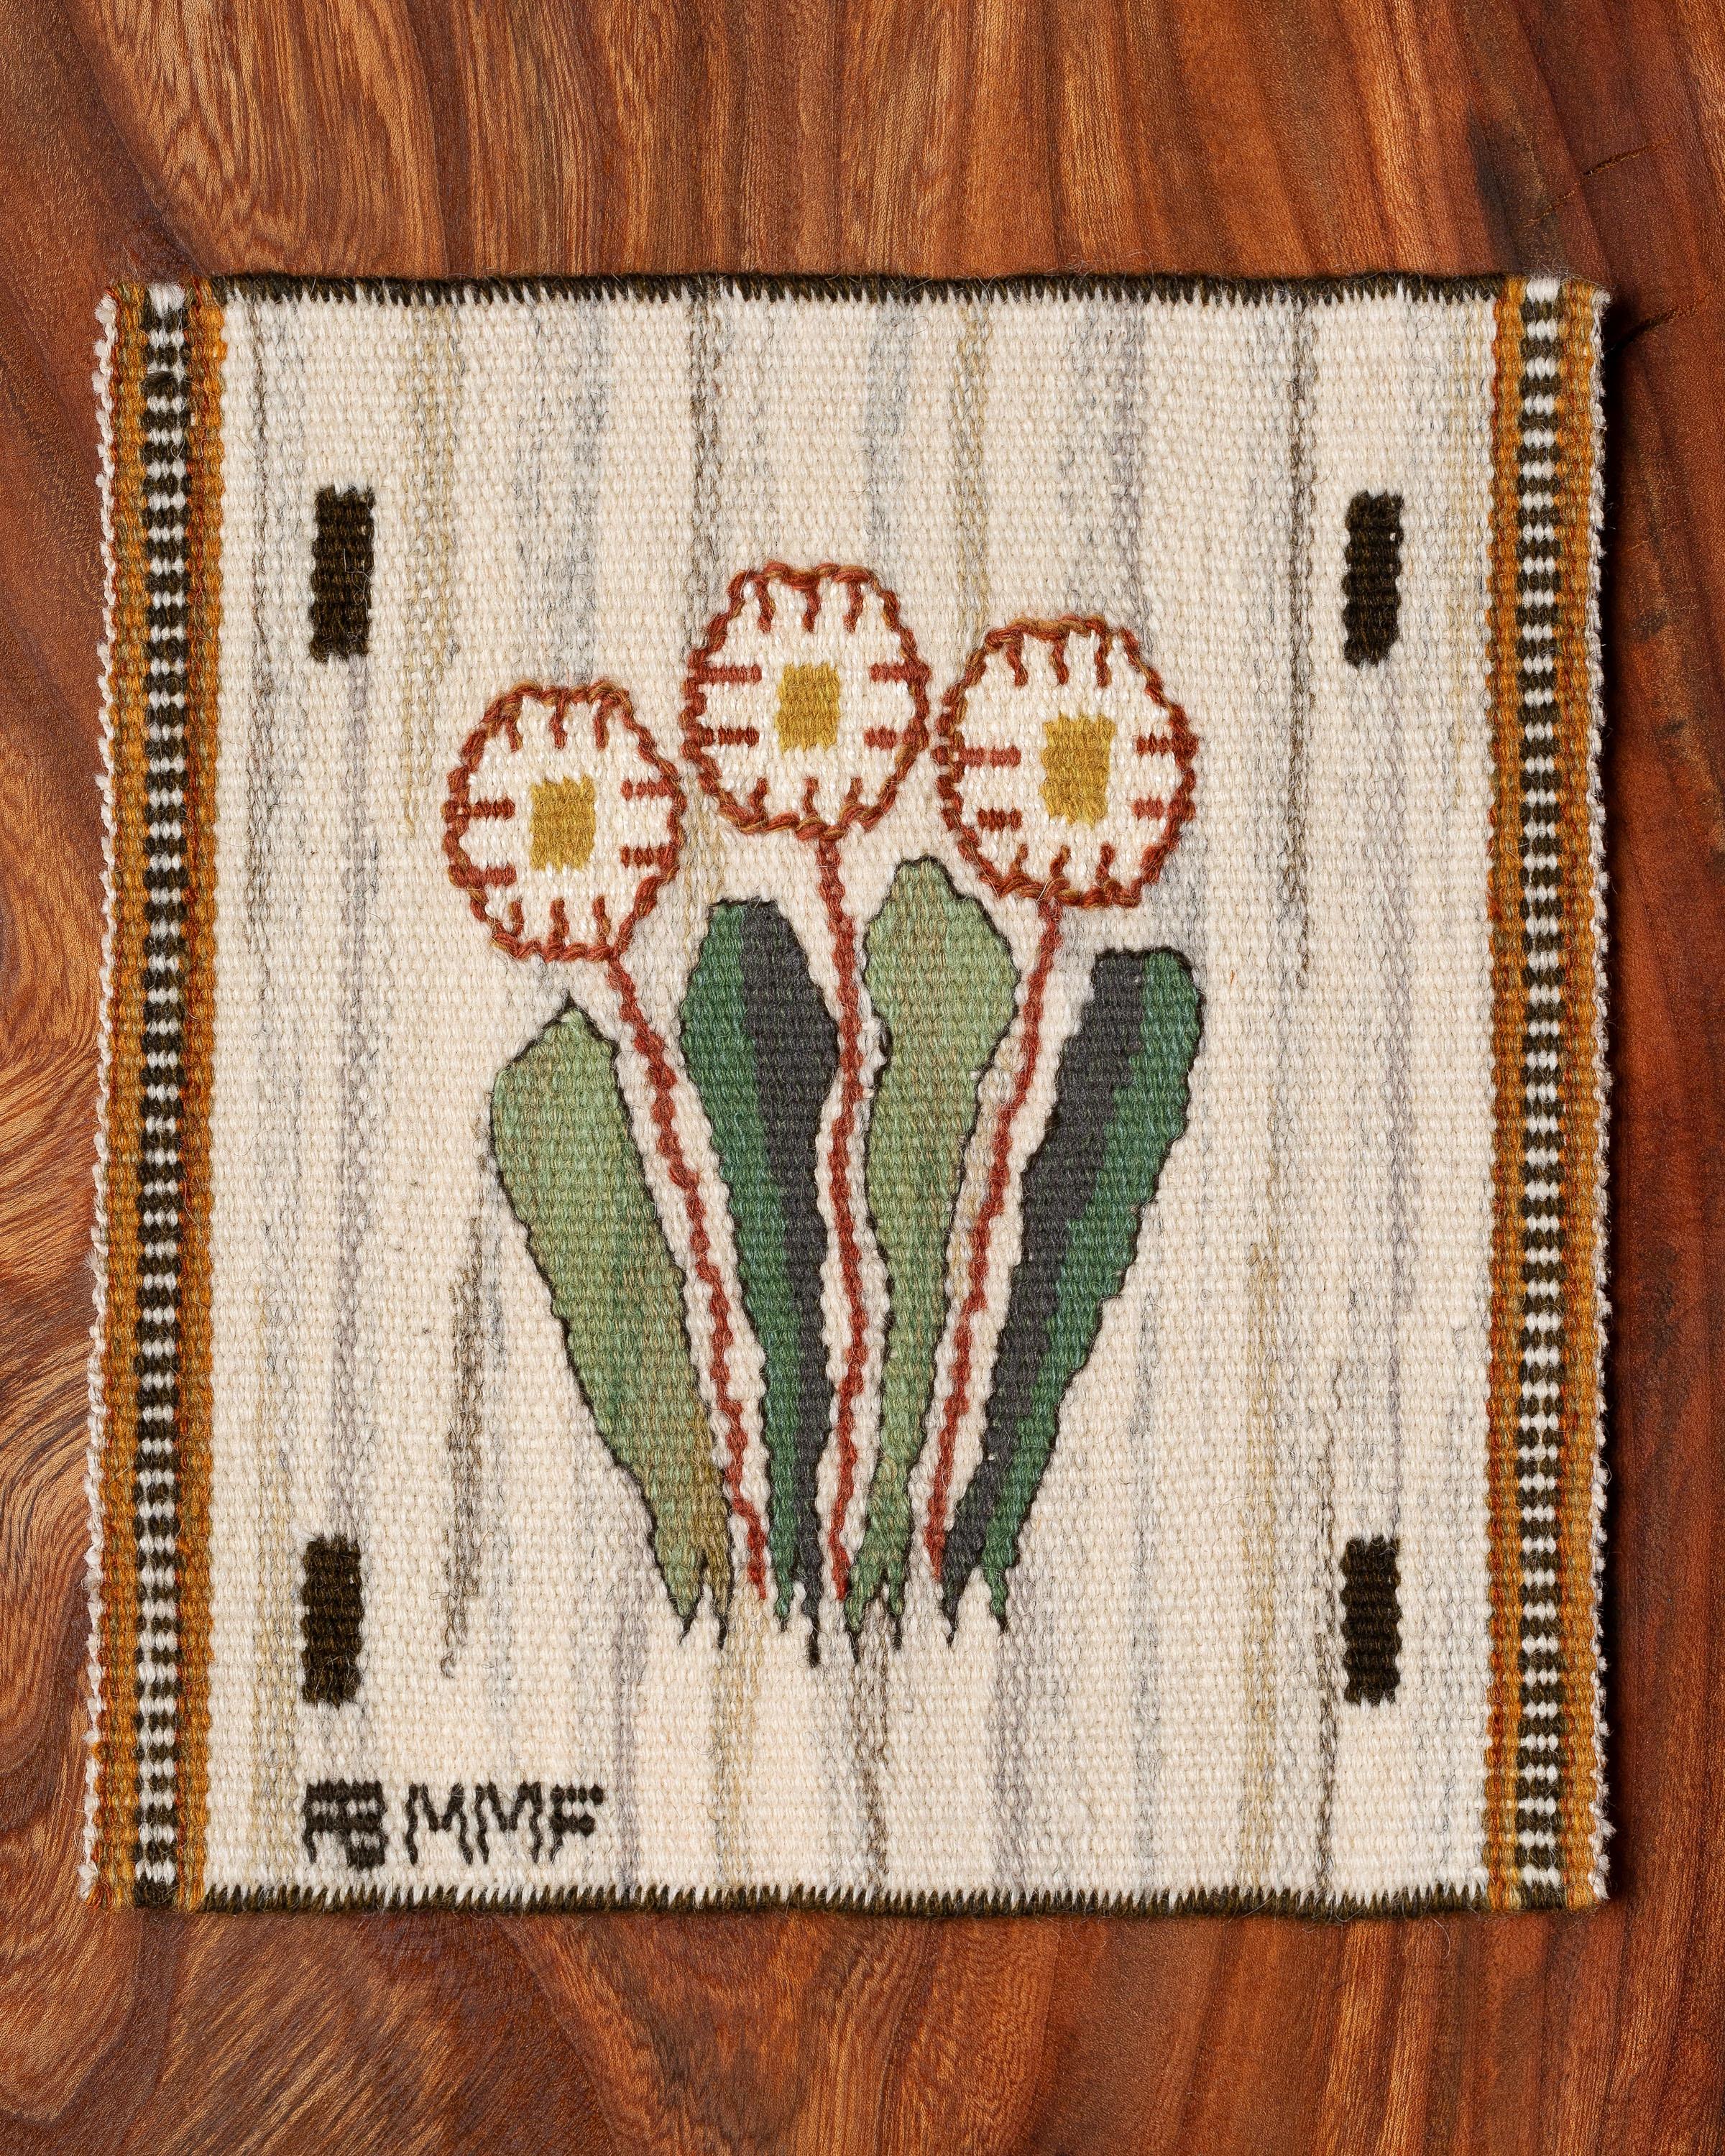 Handwoven tapestry with daisies, designed by Märta Måås-Fjetterström in 1939. 

Woven in wool on a wool warp and at the Märta Måås-Fjetterström studio in Båstad, Sweden. 

The tapestry can be framed, mounted as a decorative pillow, or used on a